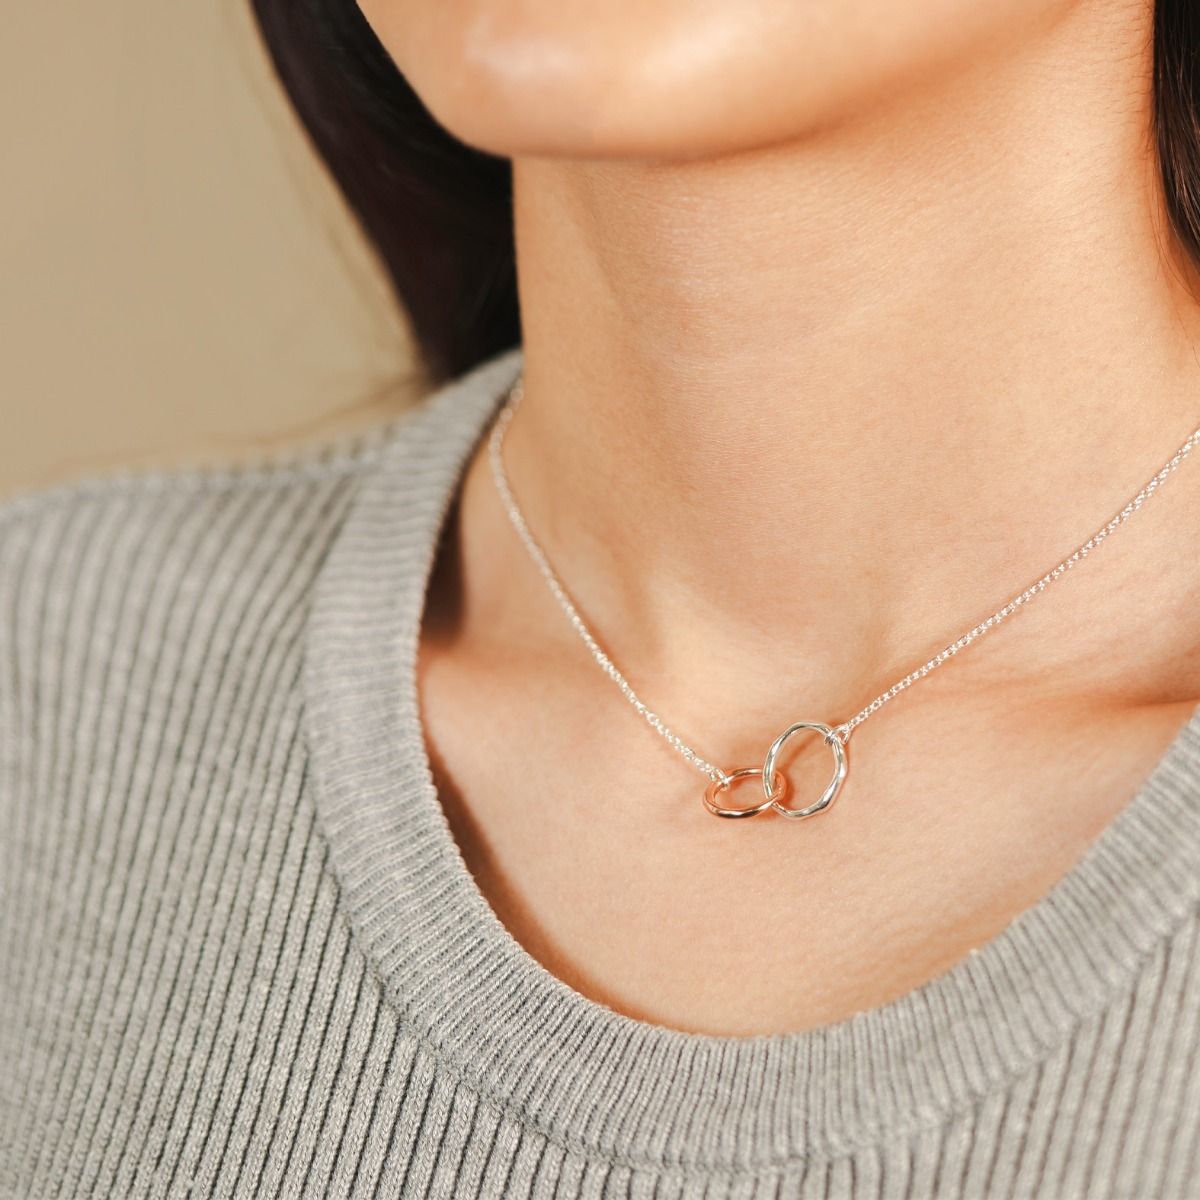 This beautifully delicate pendant features two free flowing rings entwined together and suspended on a silver-plated chain. The rose gold tone and silver-plated rings are complimented with a matching pair of stud earrings.